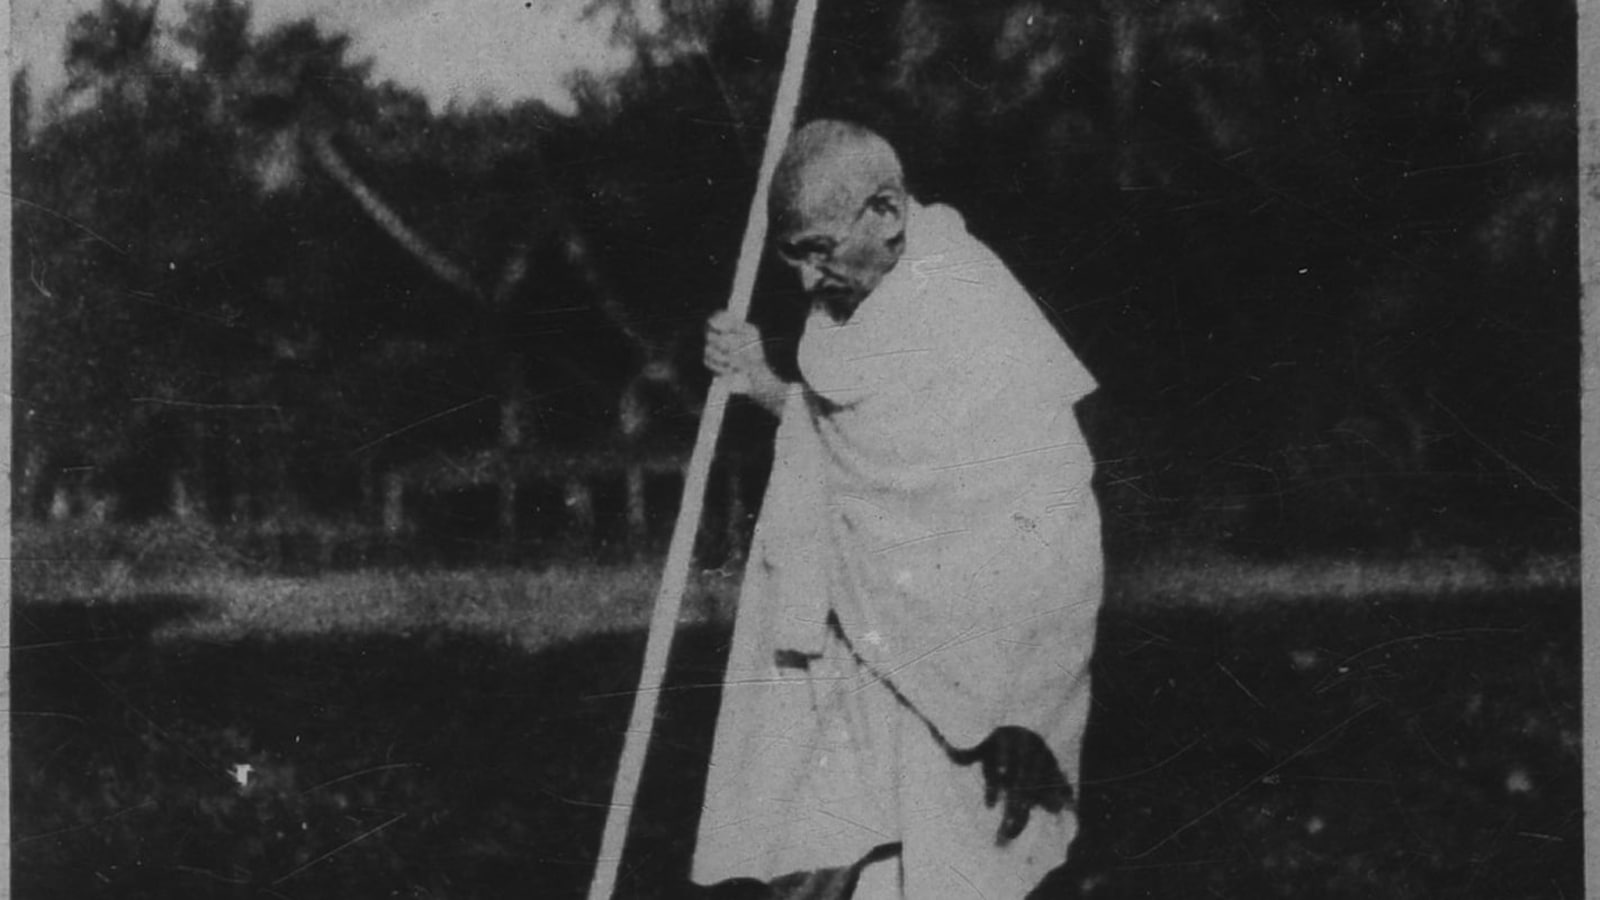 gandhi-jayanti-2022-date-history-significance-and-all-you-want-to-know